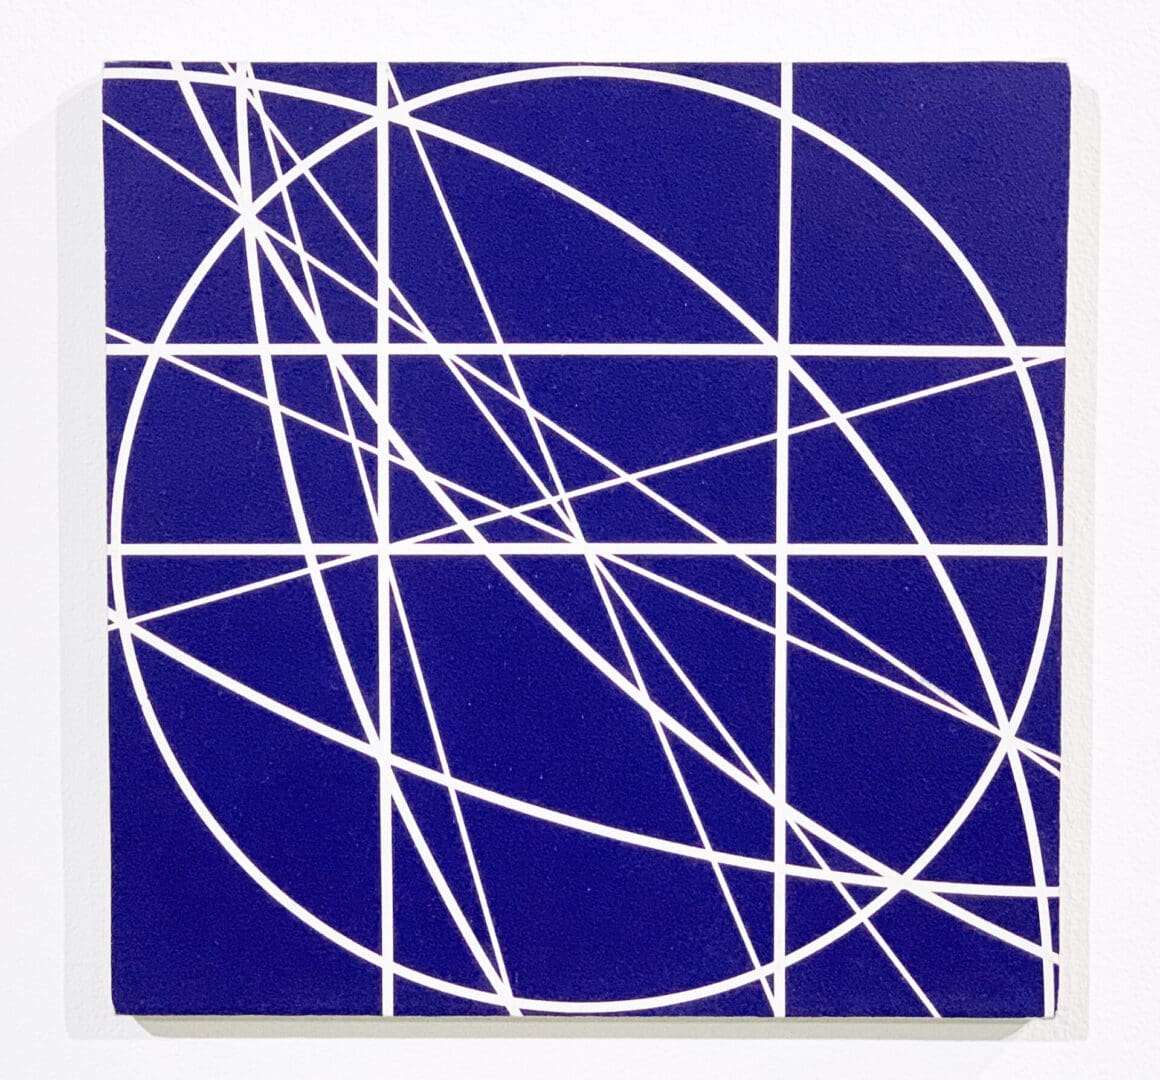 Clifford Singer. Blue Series. 1980. Acrylic on